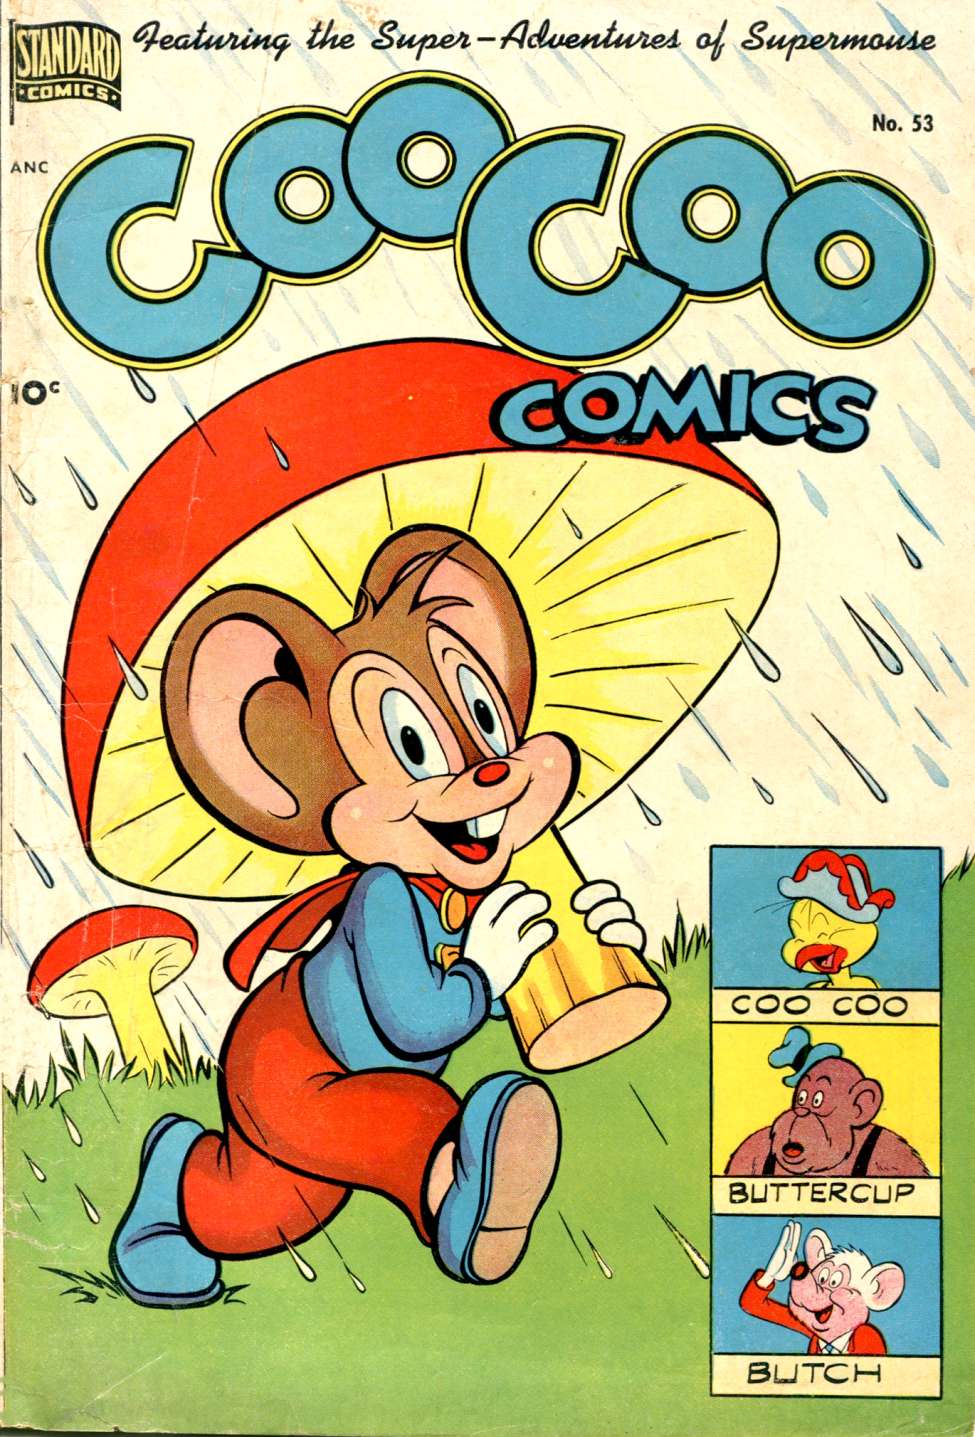 Book Cover For Coo Coo Comics 53 - Version 2